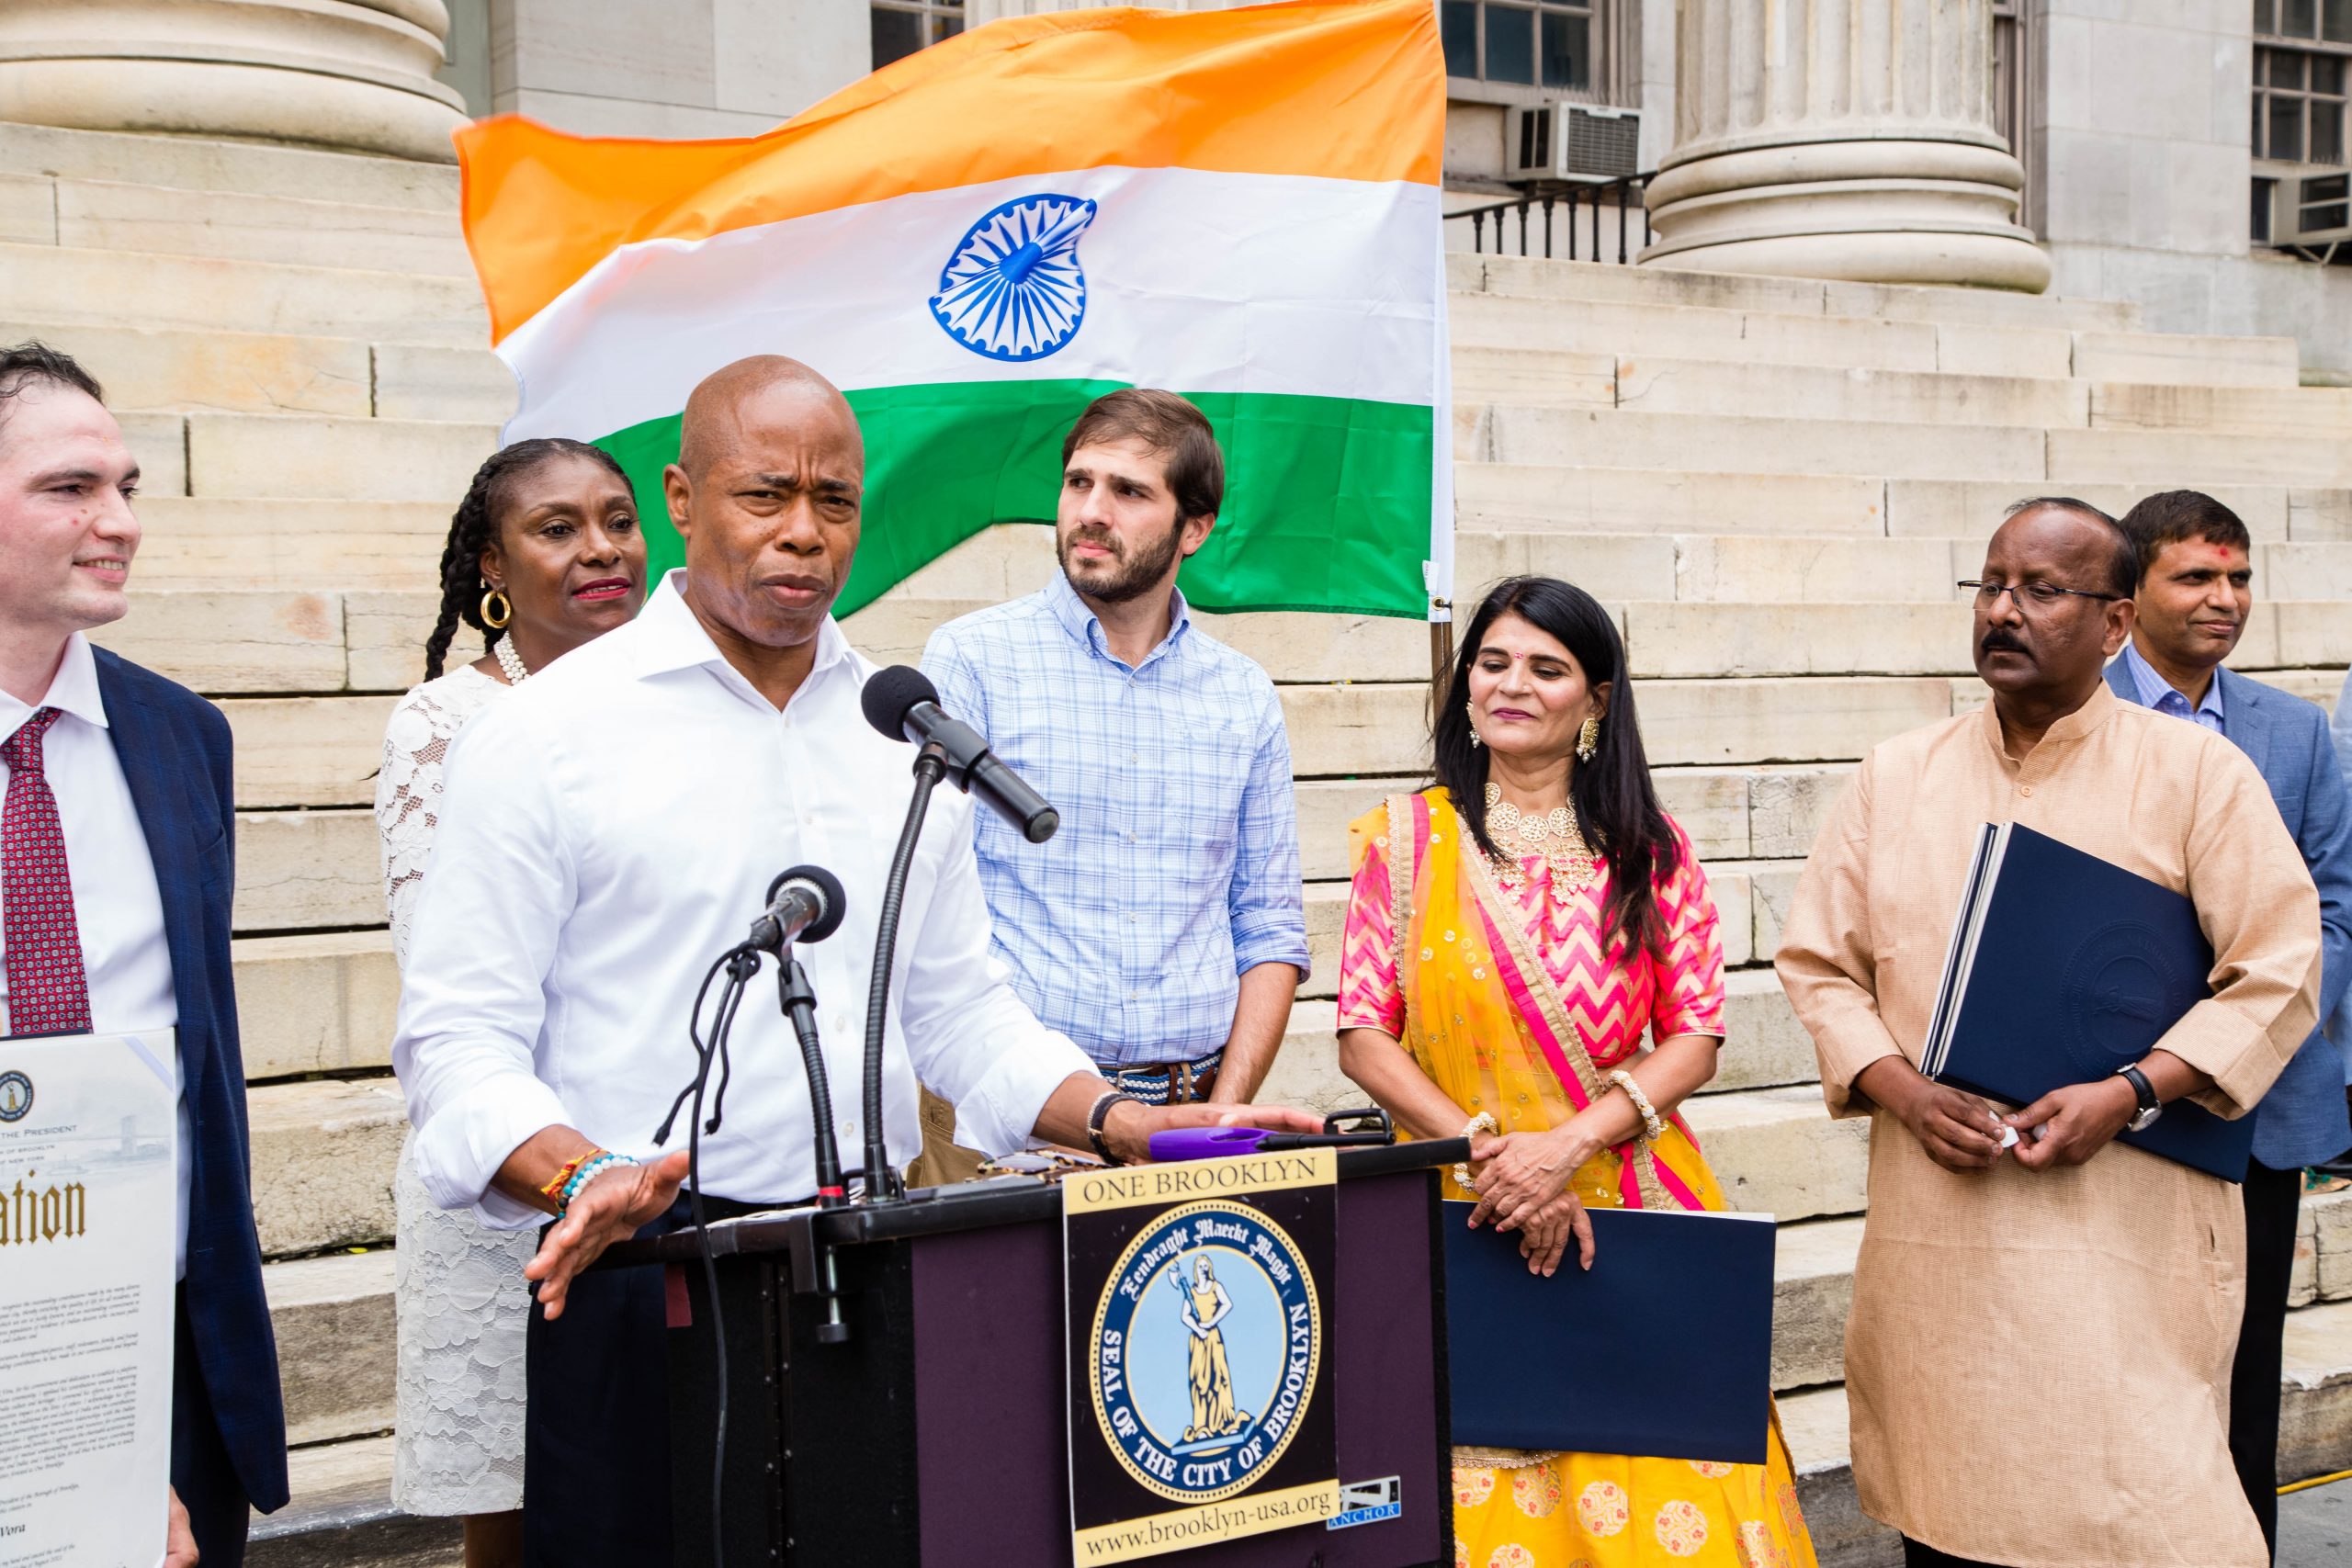 Celebration of 75th Year of India Independence at Brooklyn Borough Hall Steps